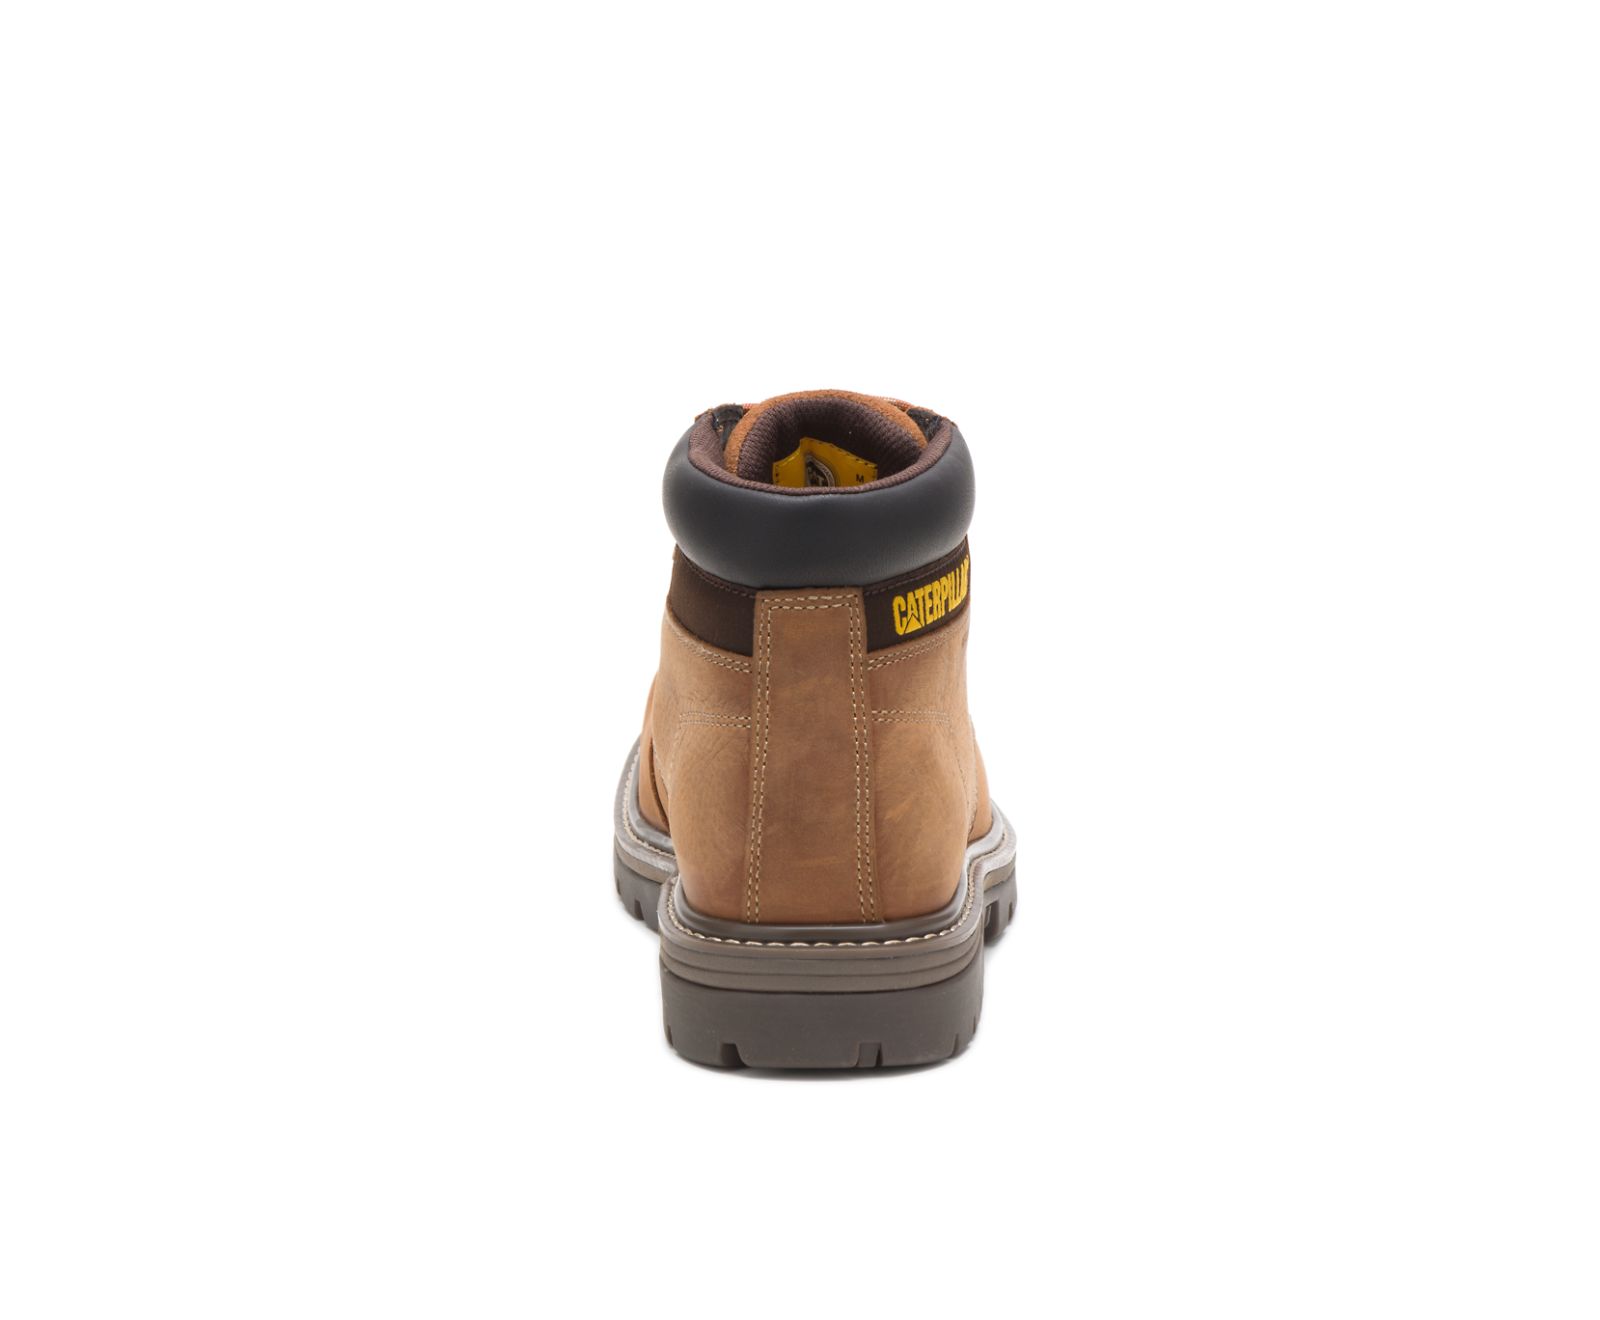 Outbase Waterproof Work Boots